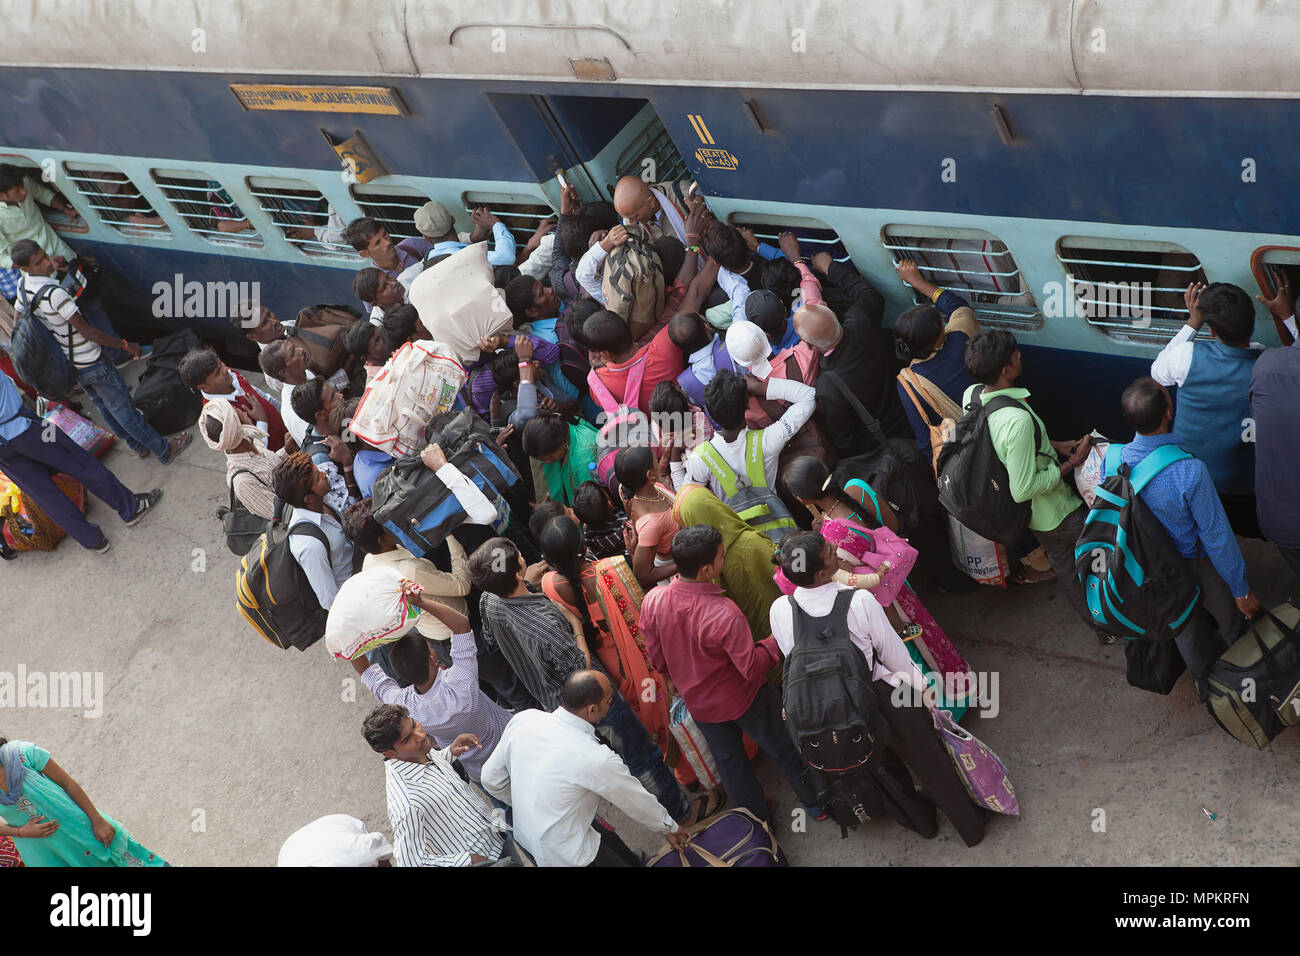 India, Bihar, Gaya, Passengers attempt to board an overcrowded second class carriage of a train at Railway Station. Stock Photo